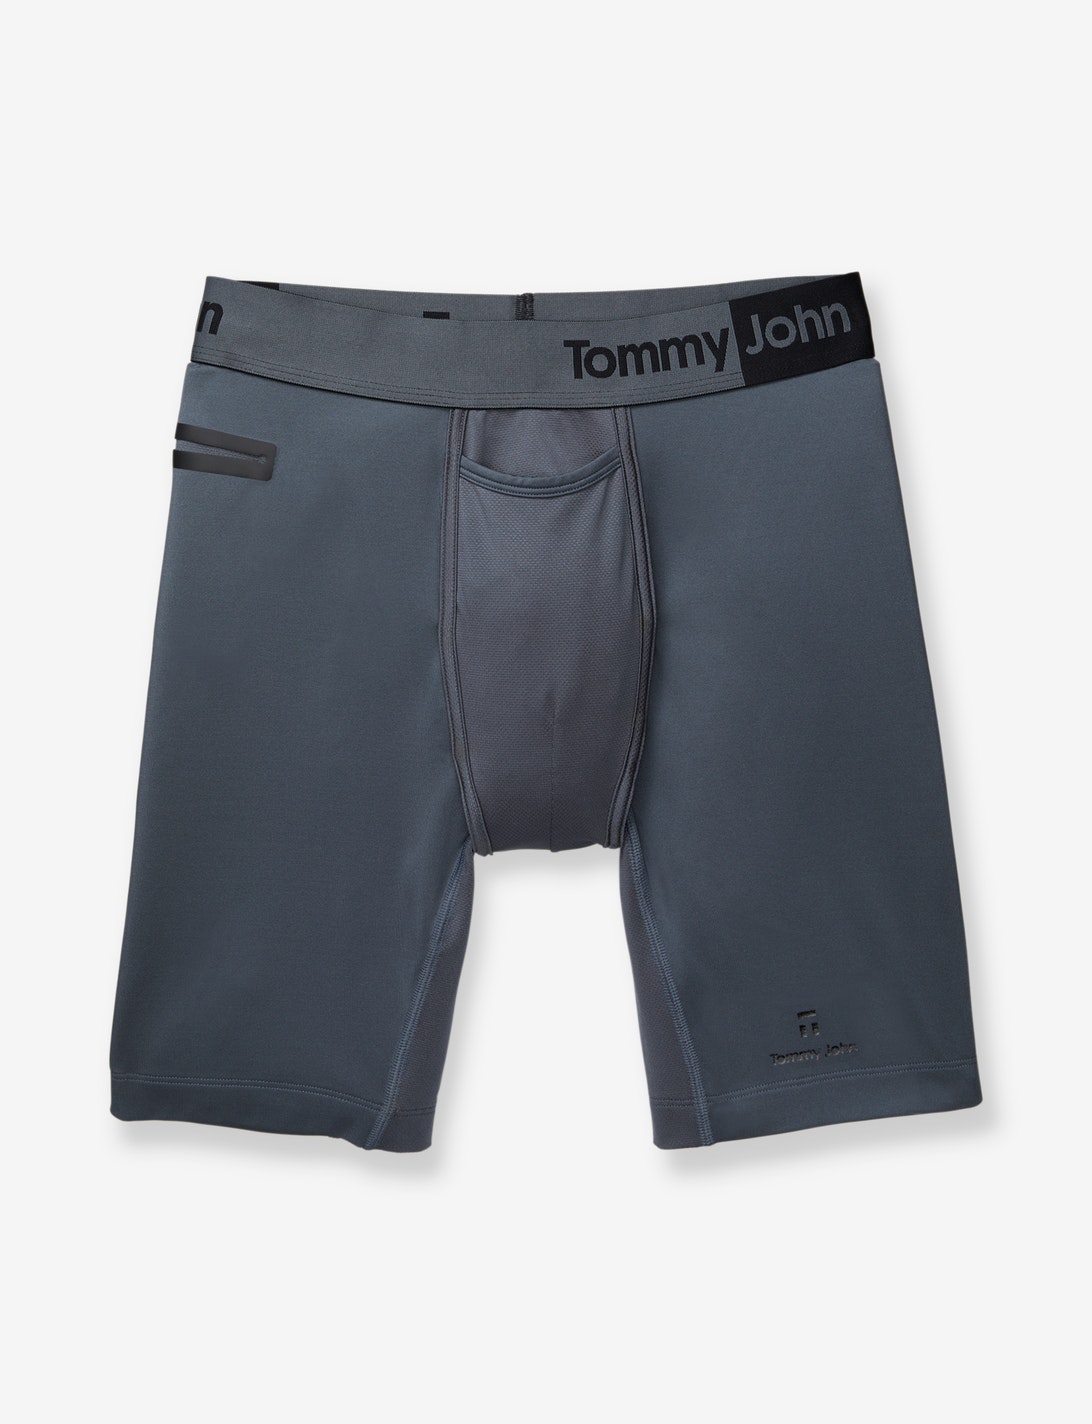 Tommy John 360 Sport 2.0 Boxer Brief 